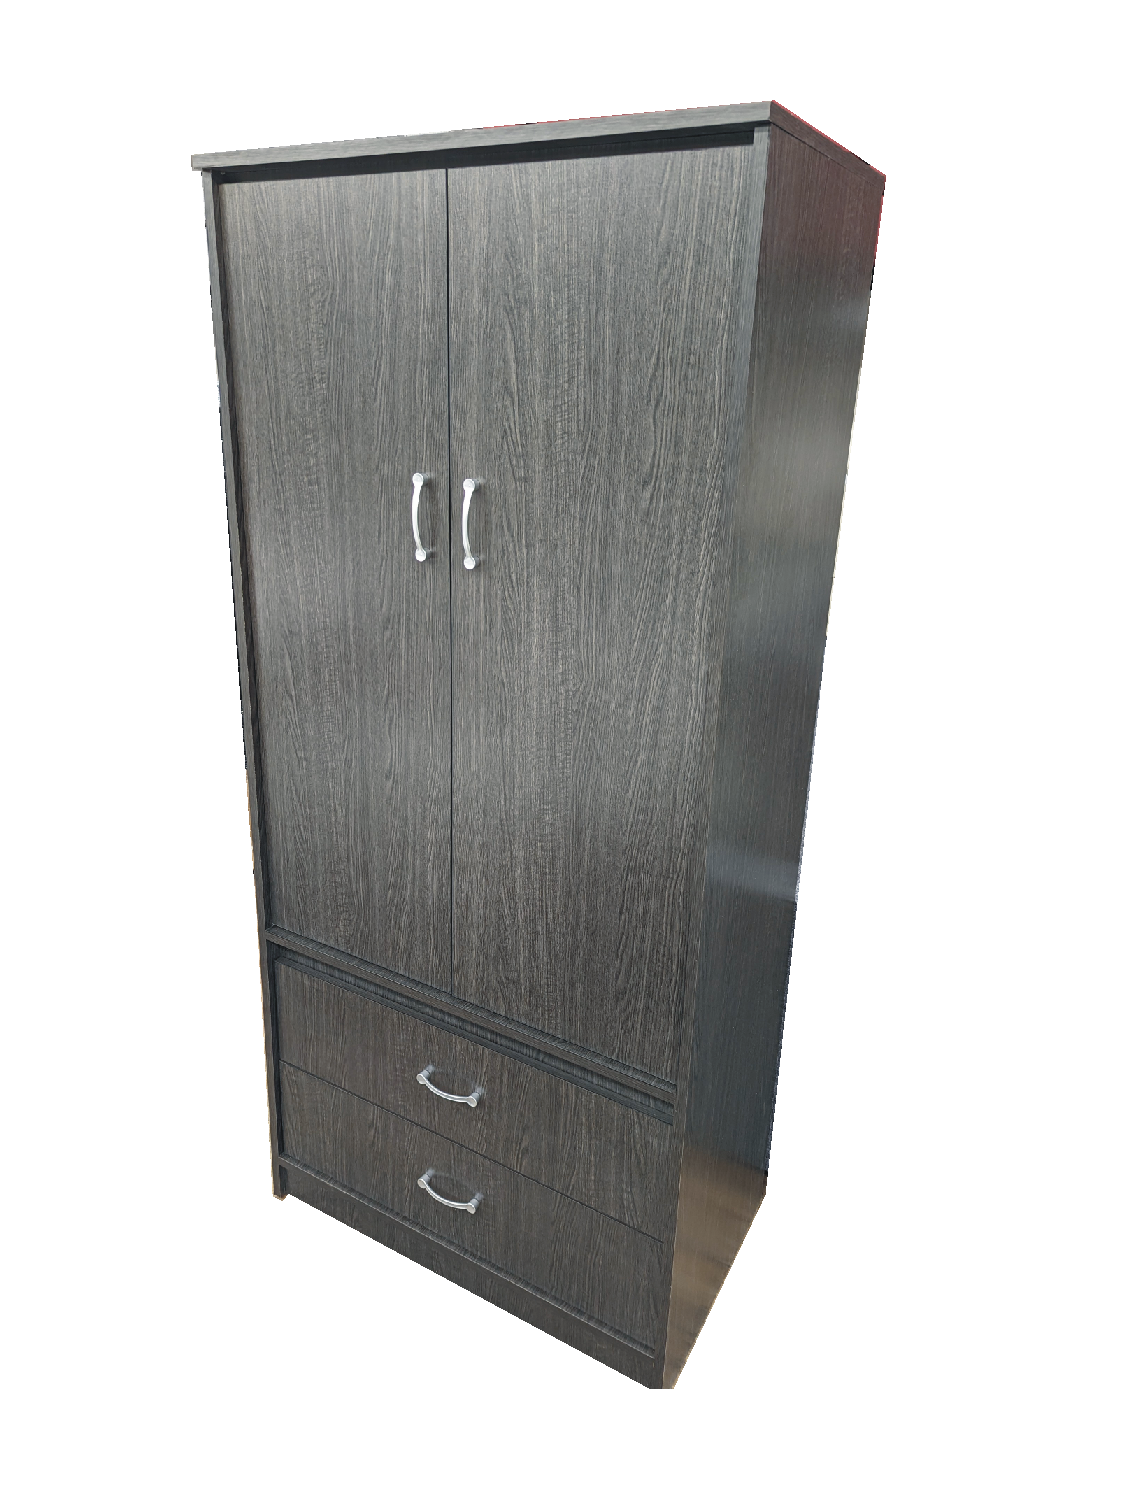 STR Wardrobe / Armoire- Available in various colours